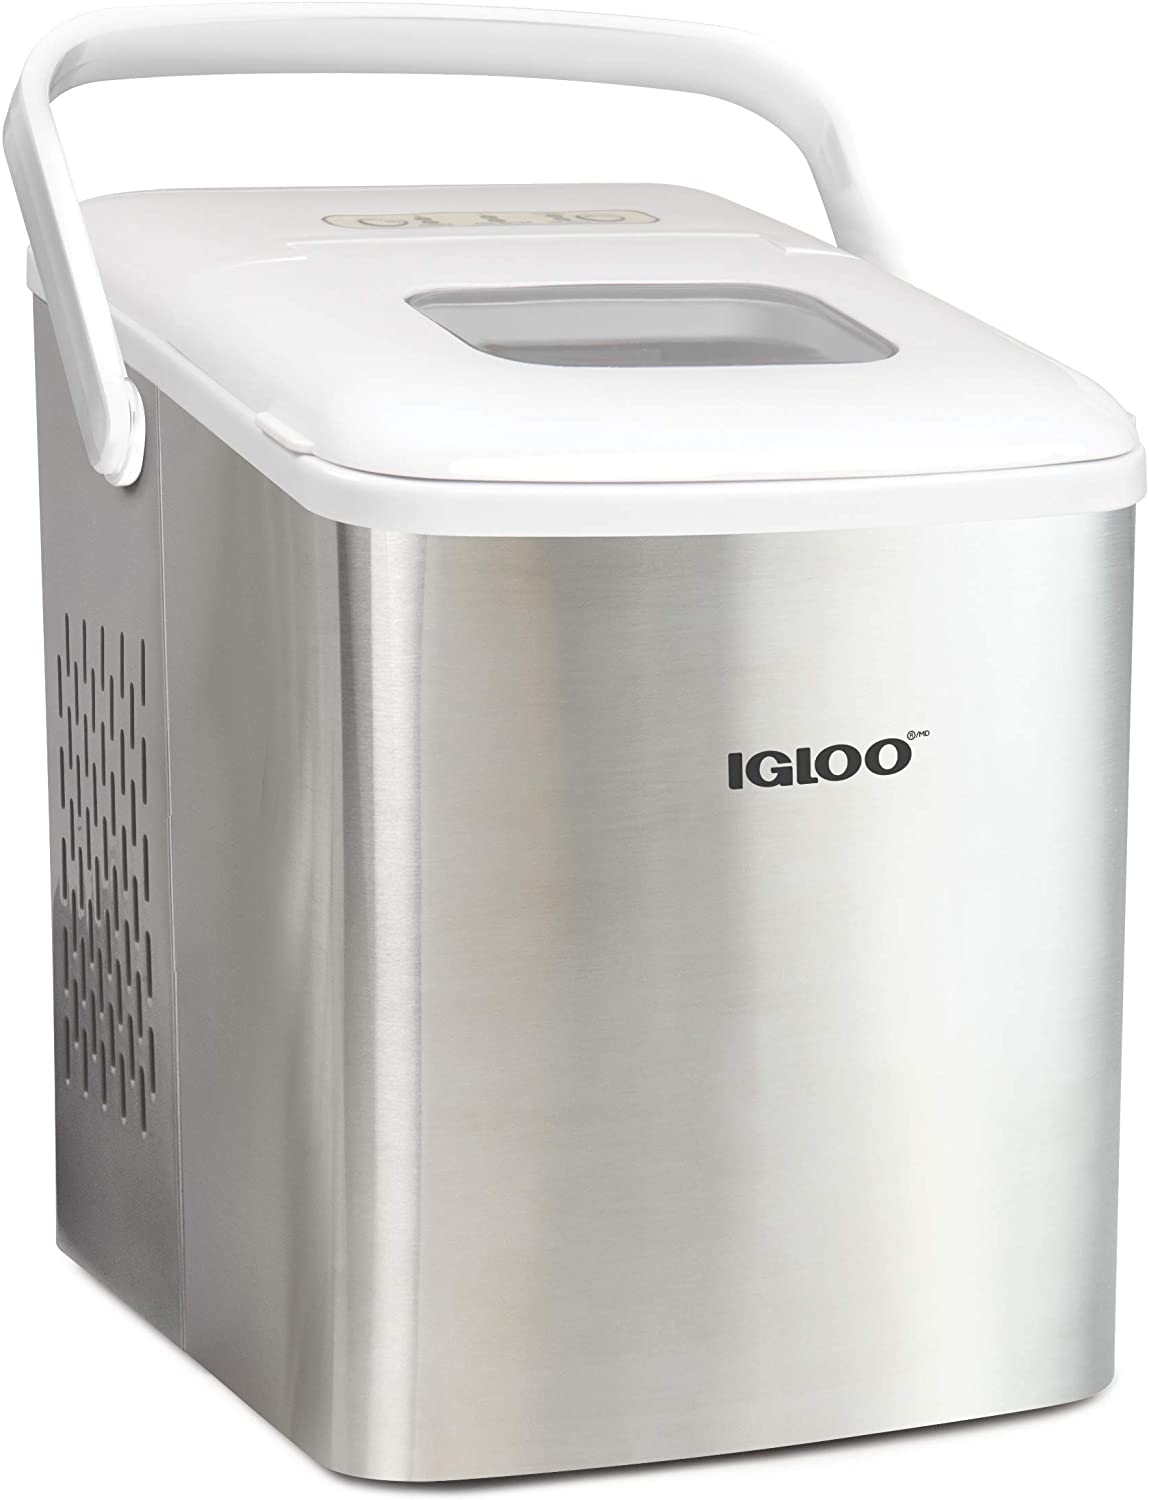 igloo-ICEB26HNSSWL-Stainless-Steel-Automatic-Self-Cleaning-Portable-Electric-Countertop-Ice-Maker-Machin